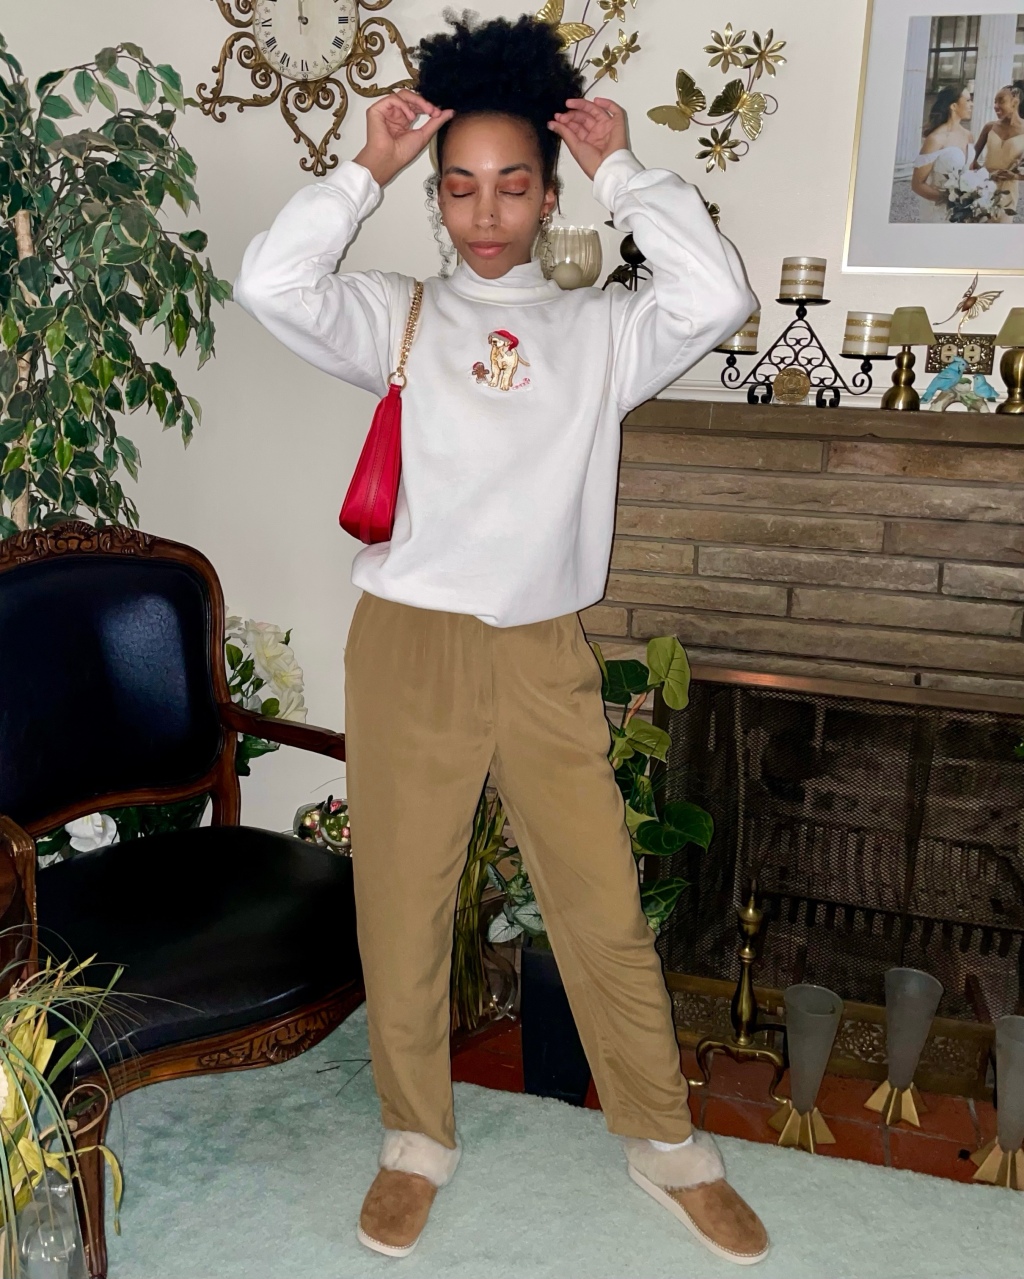 Styling a Holiday Crewneck